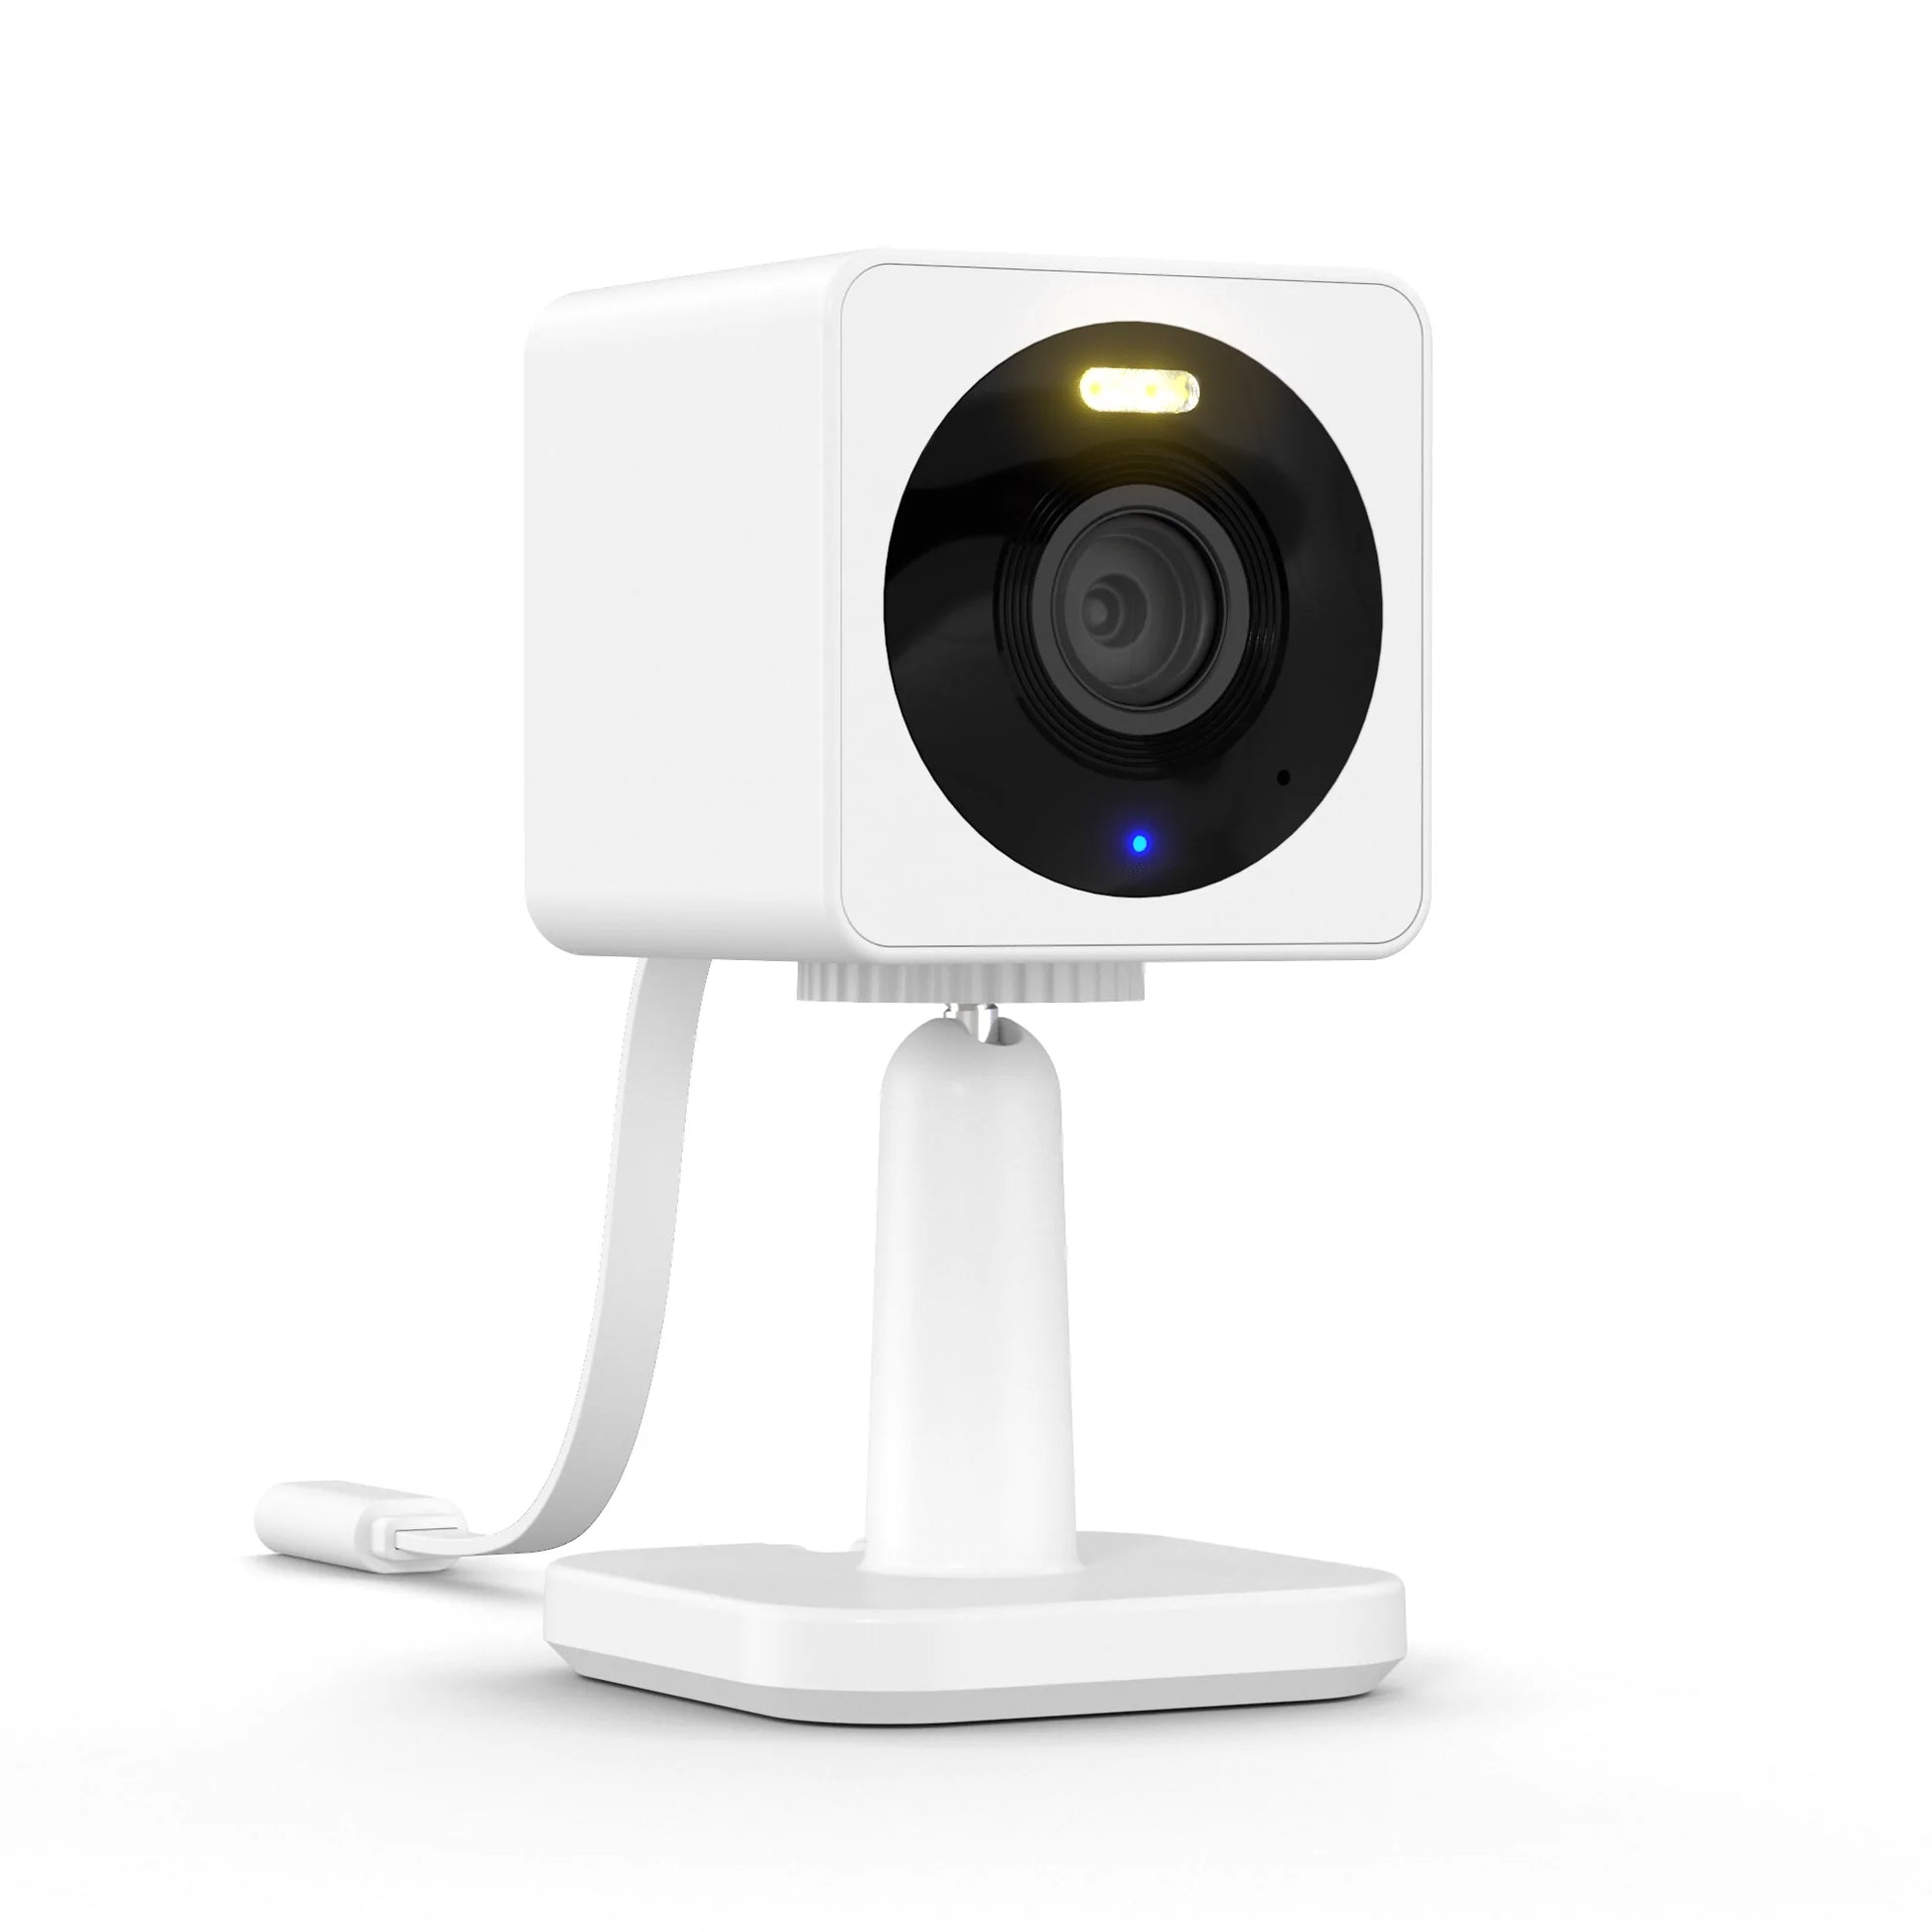 How to Change Network on Wyze Camera